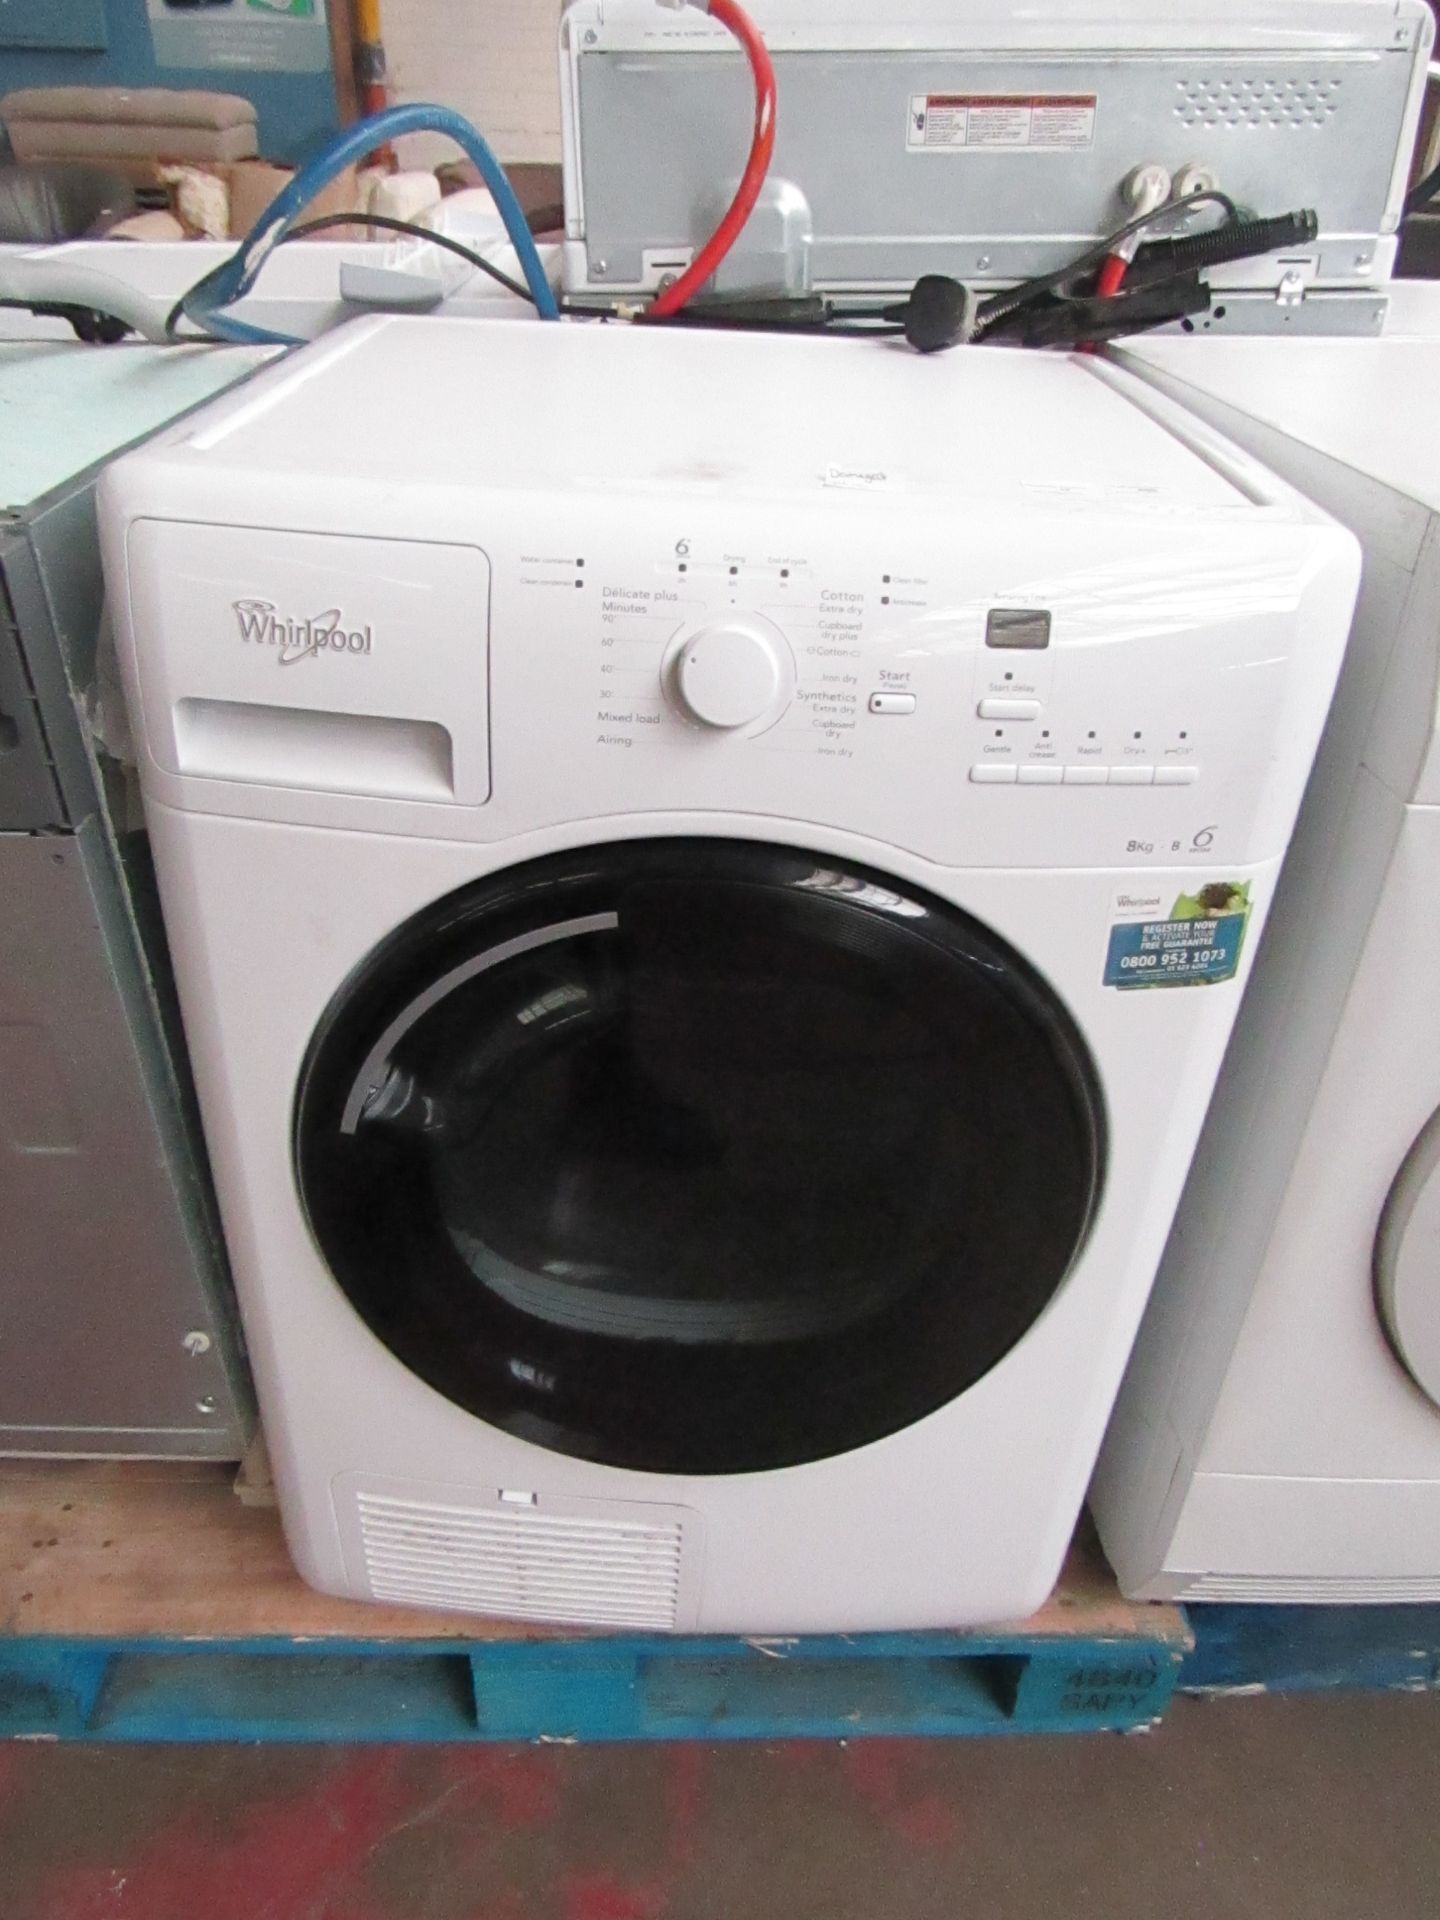 Whirlpool 6th sense tumble dryer, unable to check as has a damaged plug